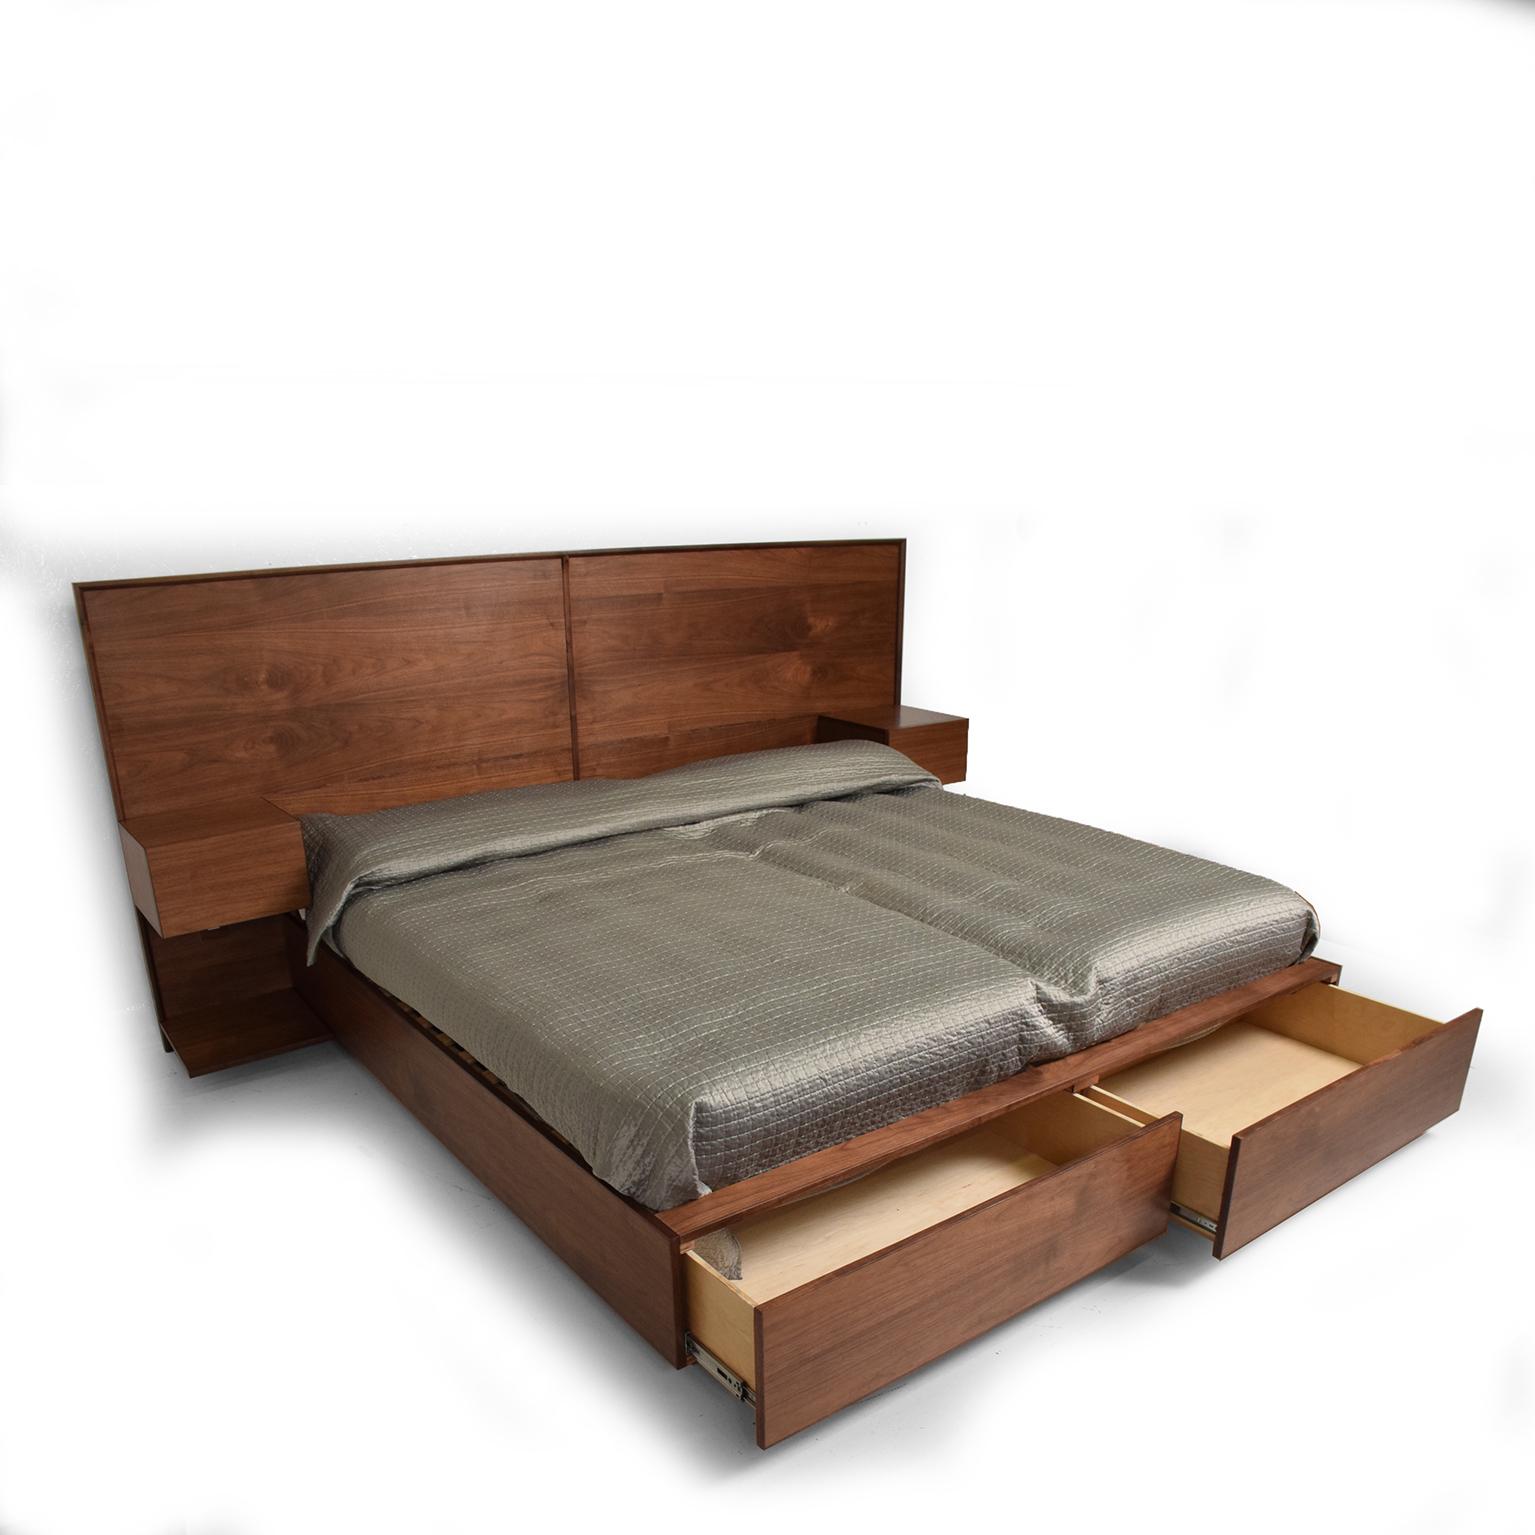 For your consideration, Mid-Century Modern custom king size Platform in walnut wood, floating nightstands USB Ports. 

Custom built with tall headboard (50